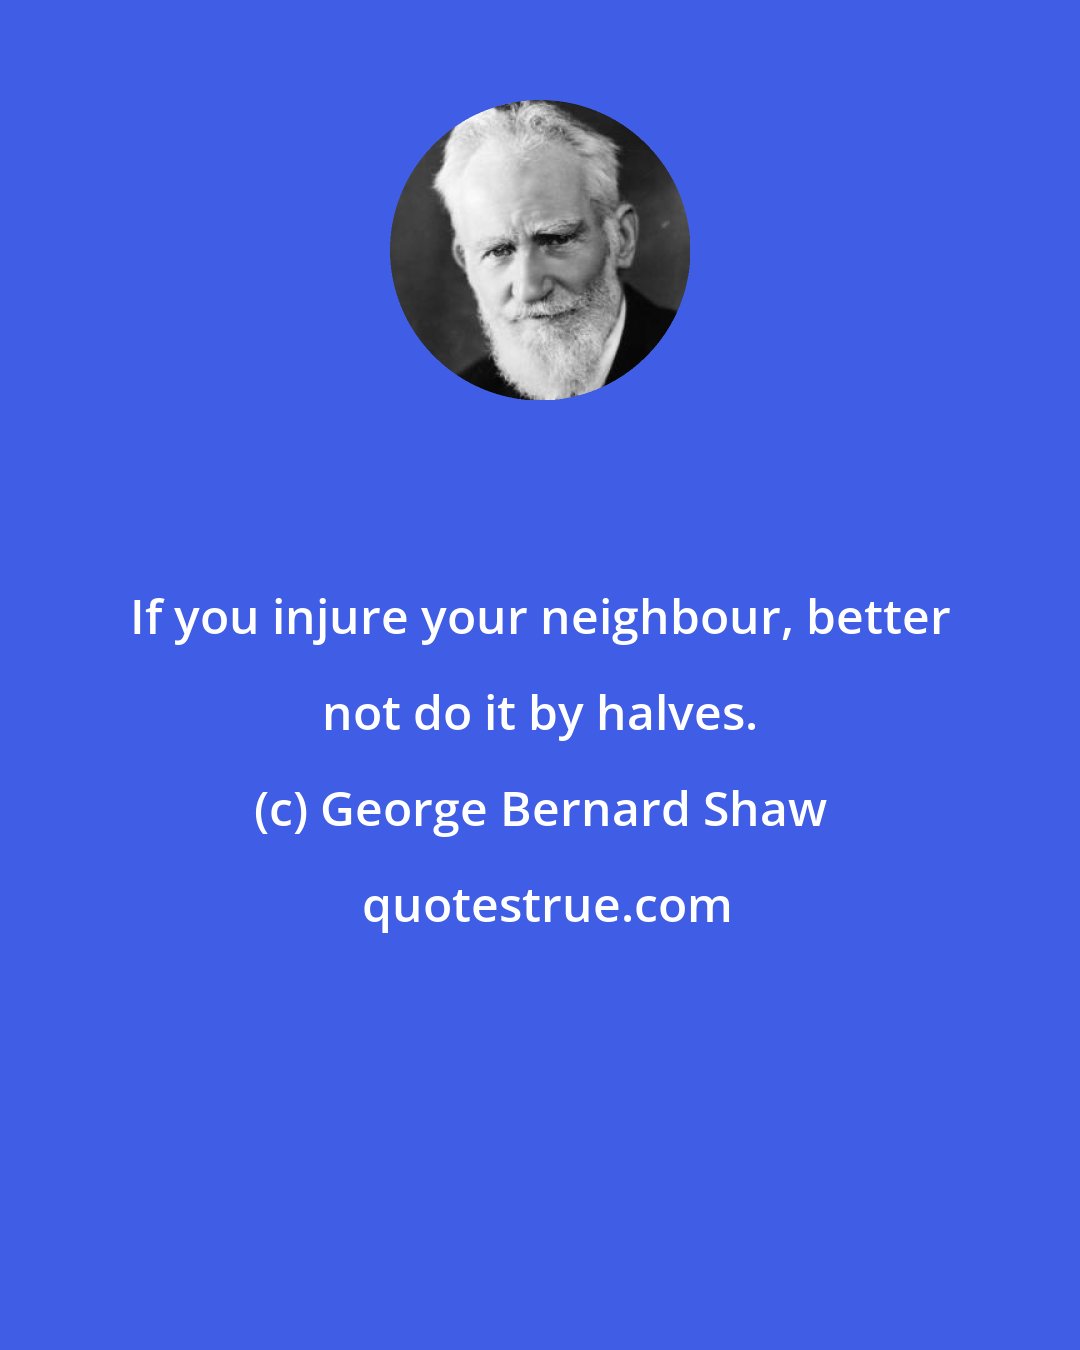 George Bernard Shaw: If you injure your neighbour, better not do it by halves.